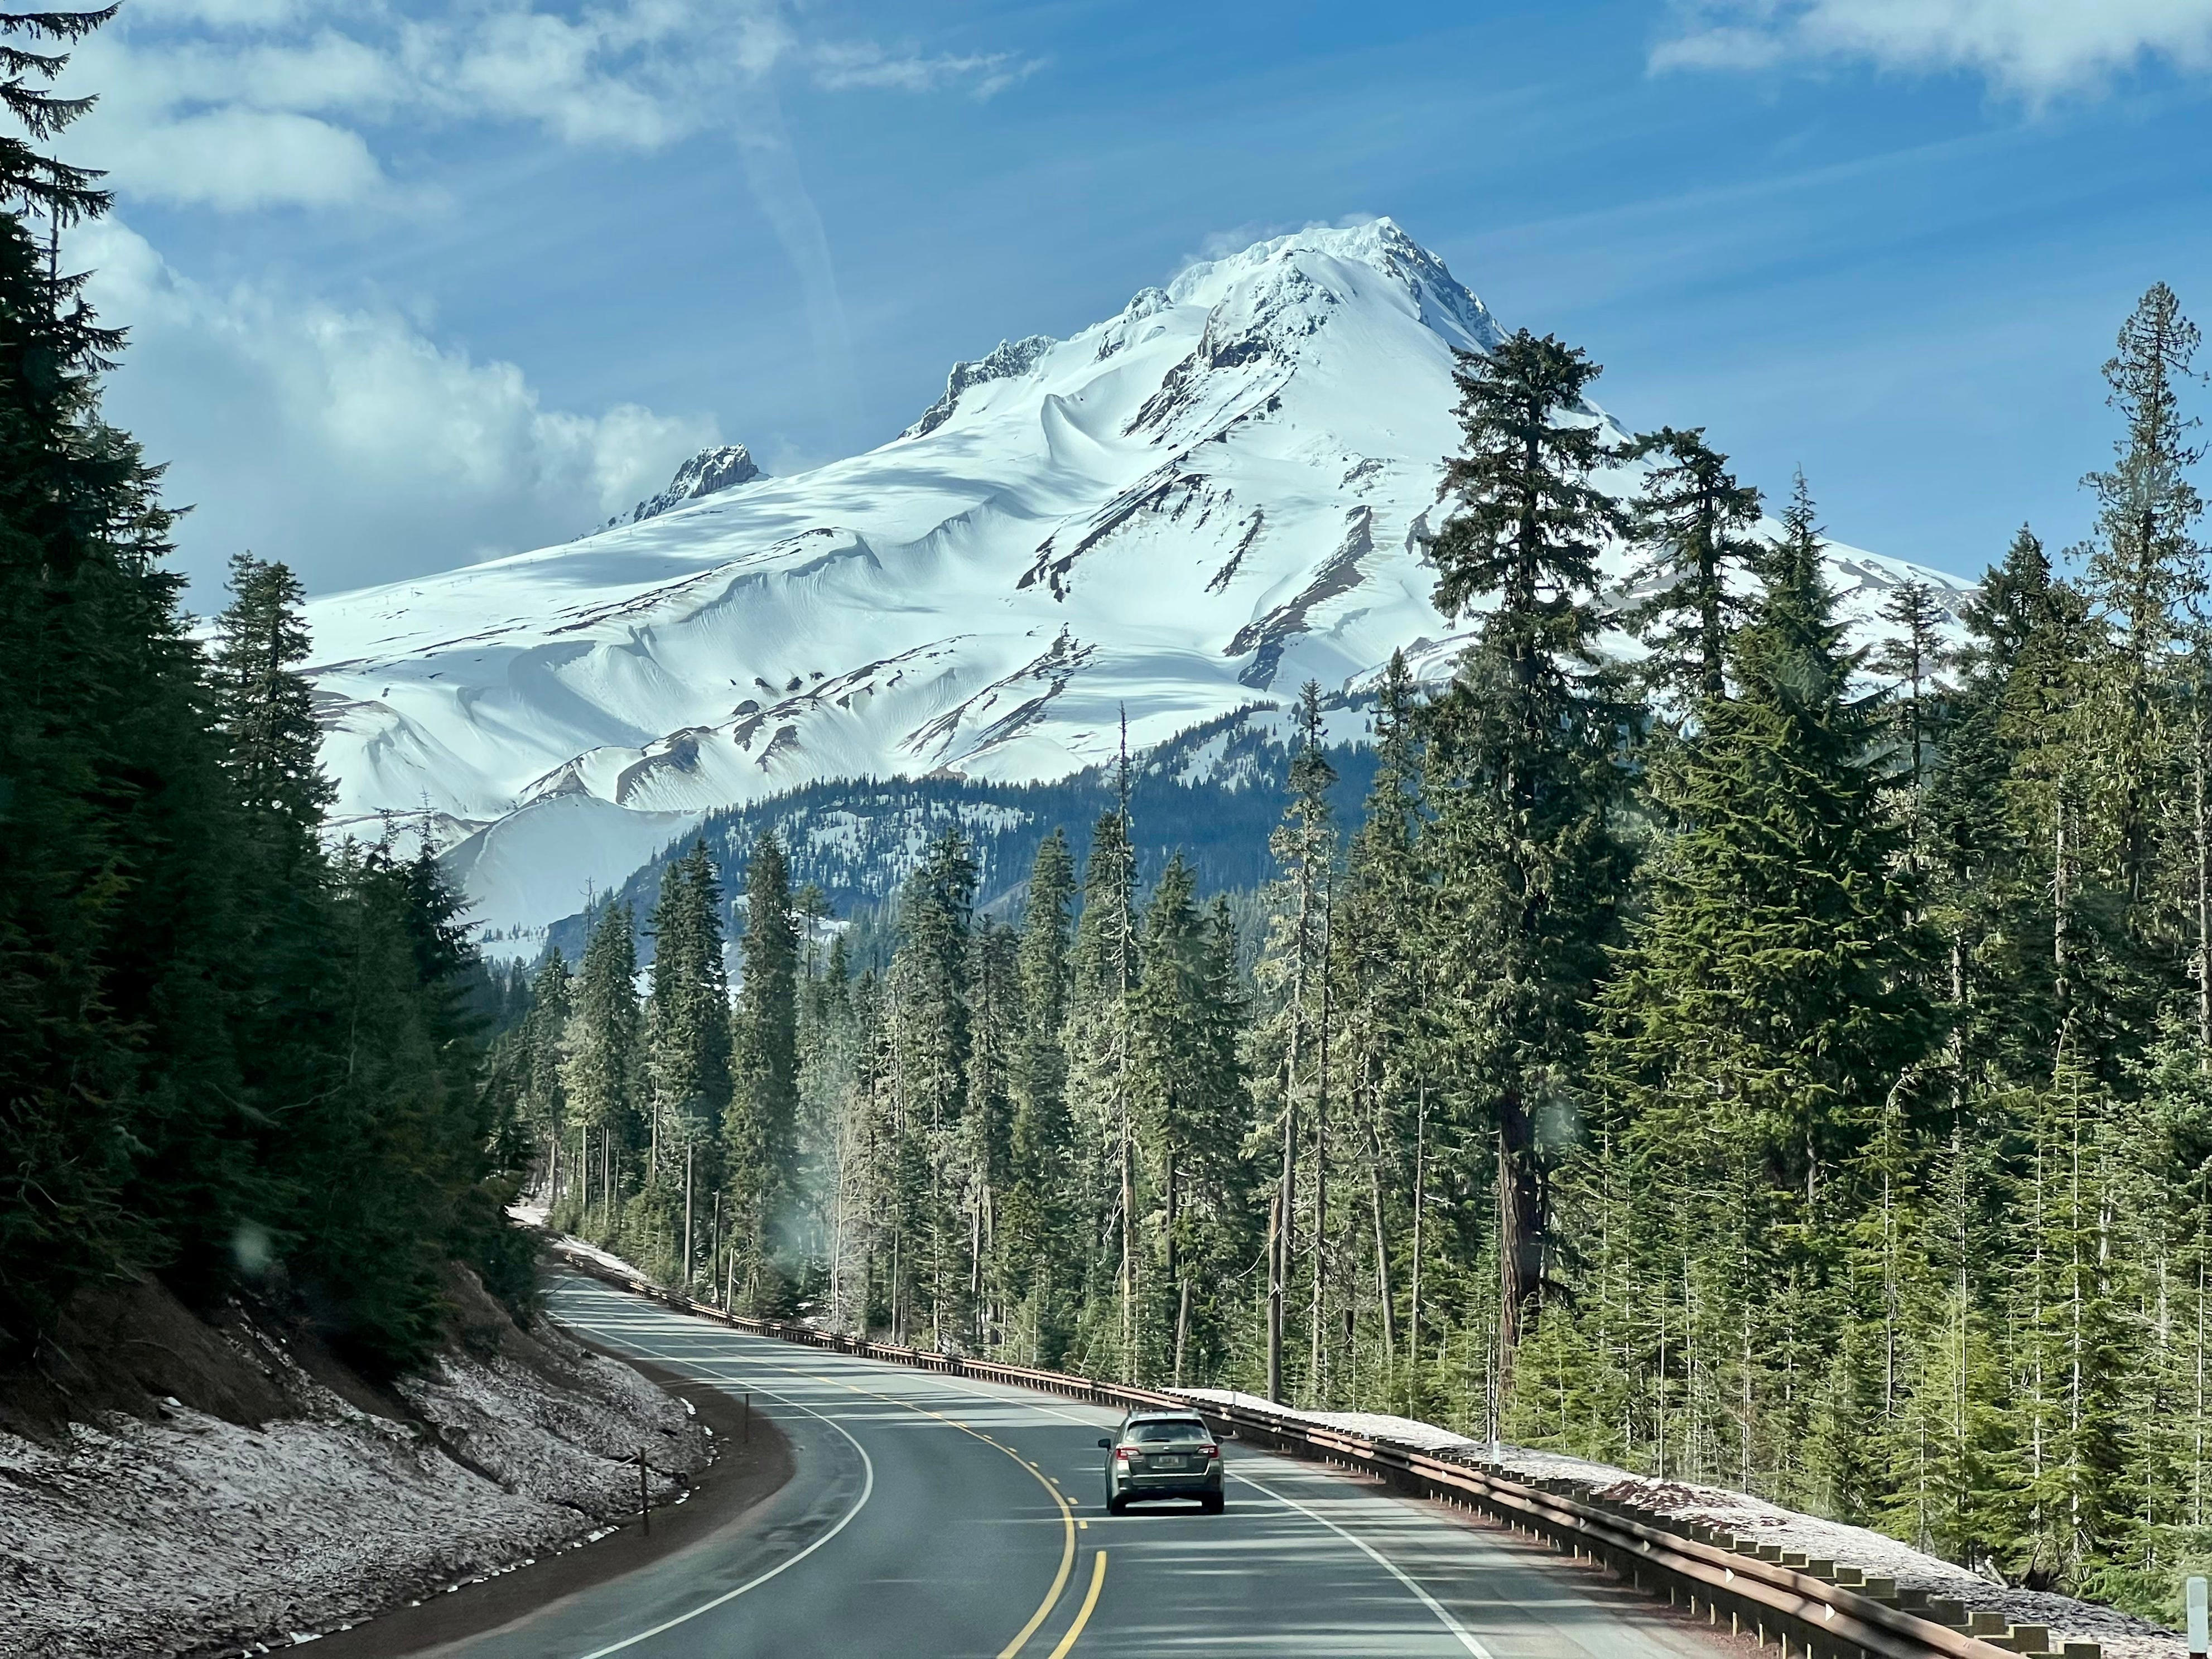 <p>Our trip took us to Mount Shasta, Crater Lake National Park, Vancouver, Portland, Mount Hood, the Oregon Coast, and various cities in Humboldt County.</p><p>We stayed in RV parks and on loved ones' properties, but the van itself was our home base. On some mornings, we woke up in the city, and on others, we started the day <a href="https://www.insider.com/best-beaches-to-visit-in-the-us-2019-5">on the beach</a> or in the forest. </p><p>The experience was very in line with my travel style.</p>